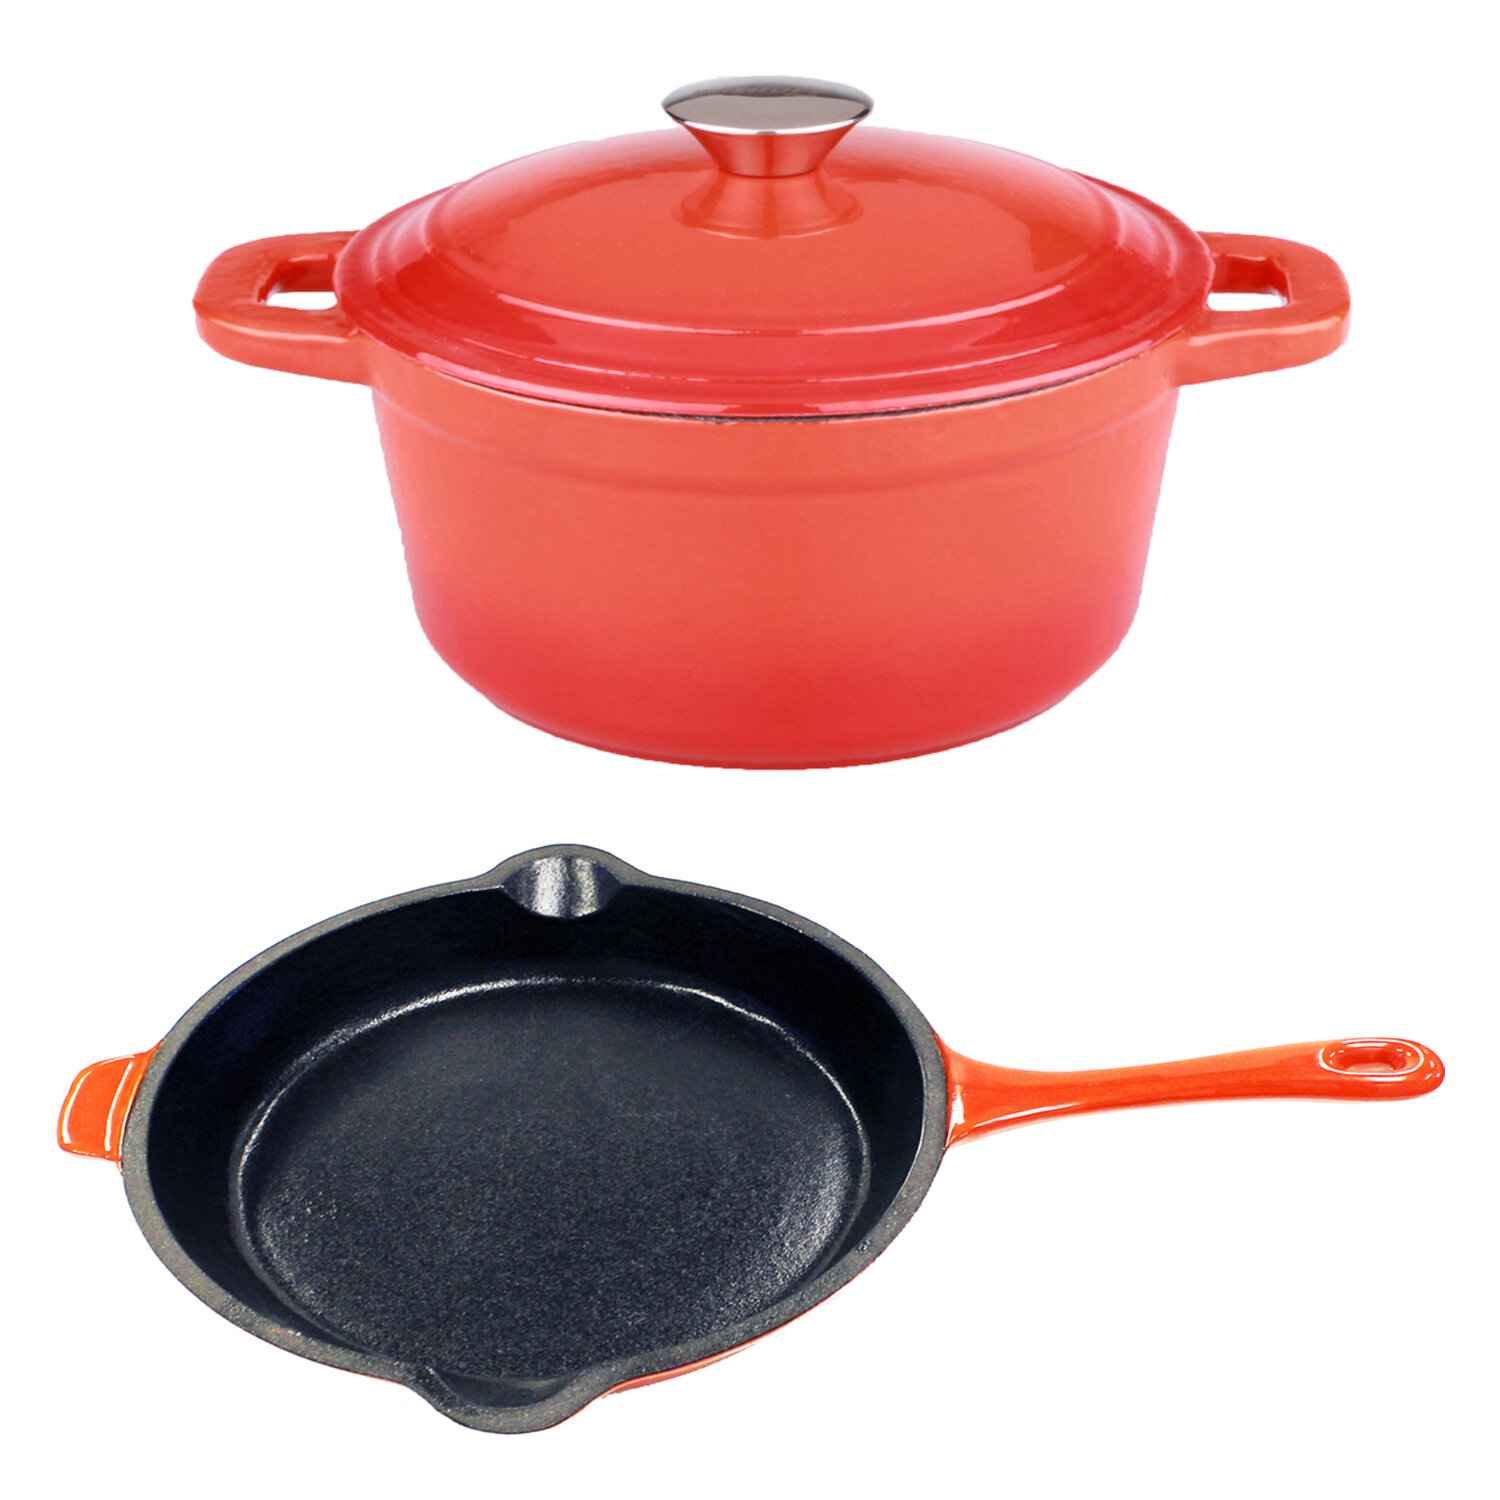 BergHOFF Neo 7qt Cast Iron Round Covered Dutch Oven, Red